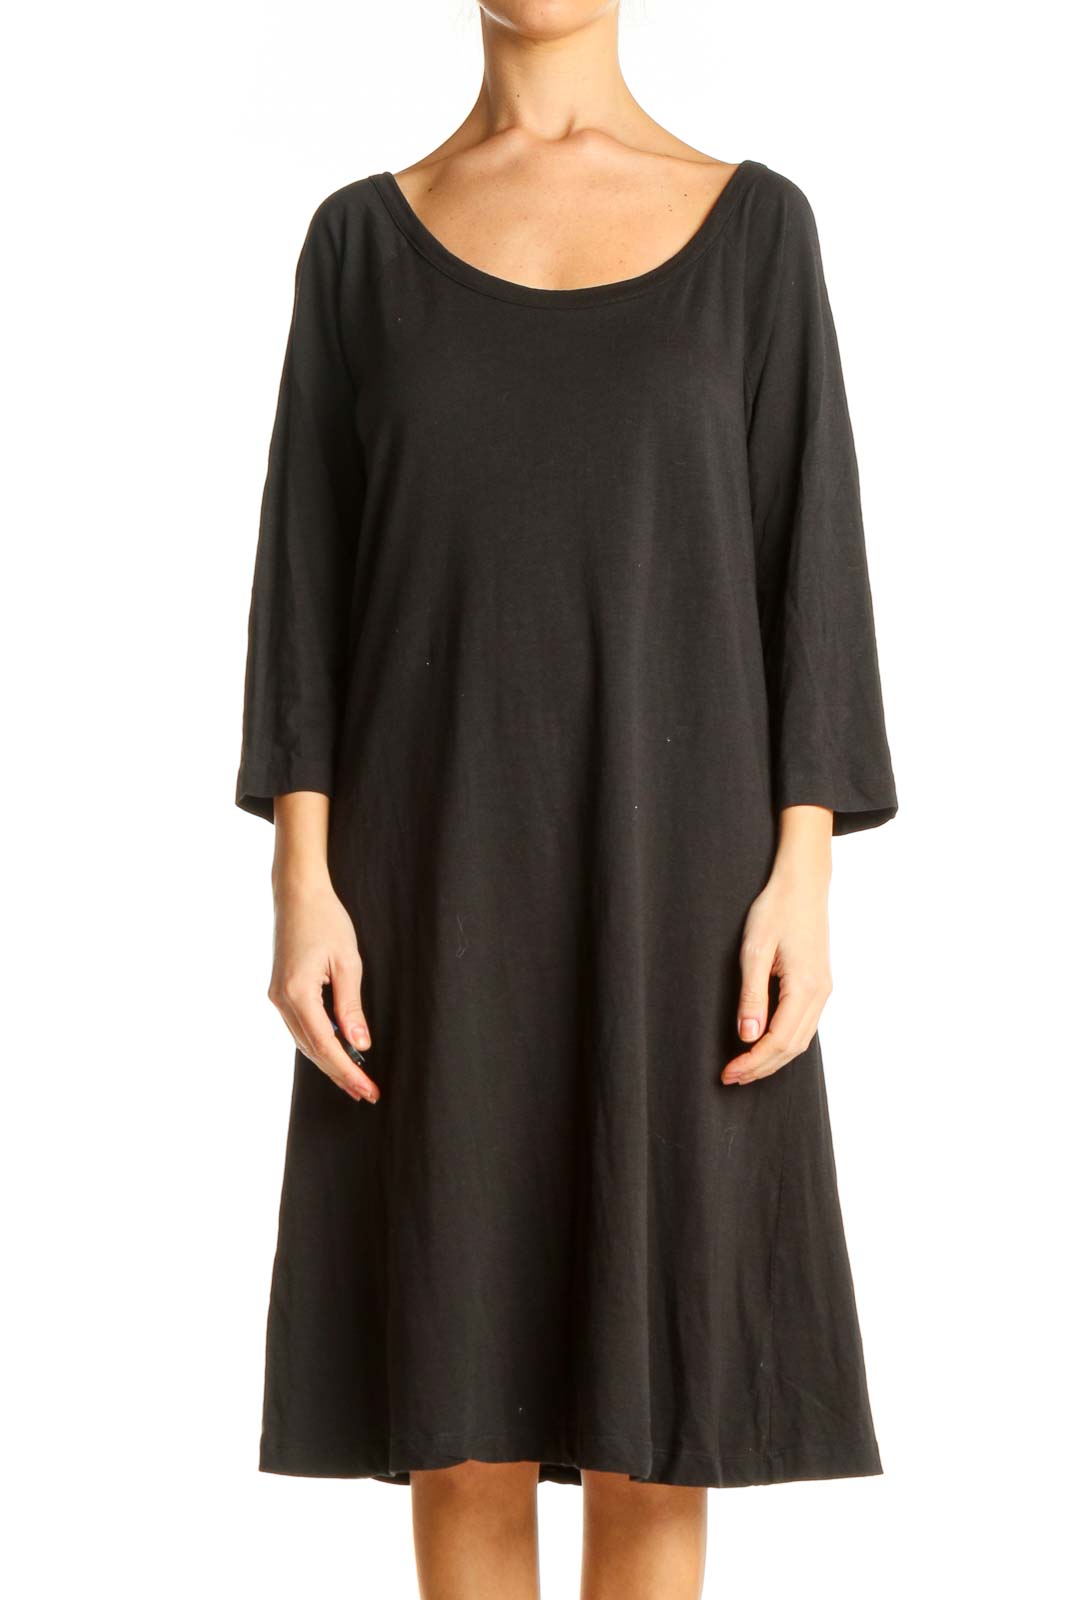 Black Solid Day Dress Front